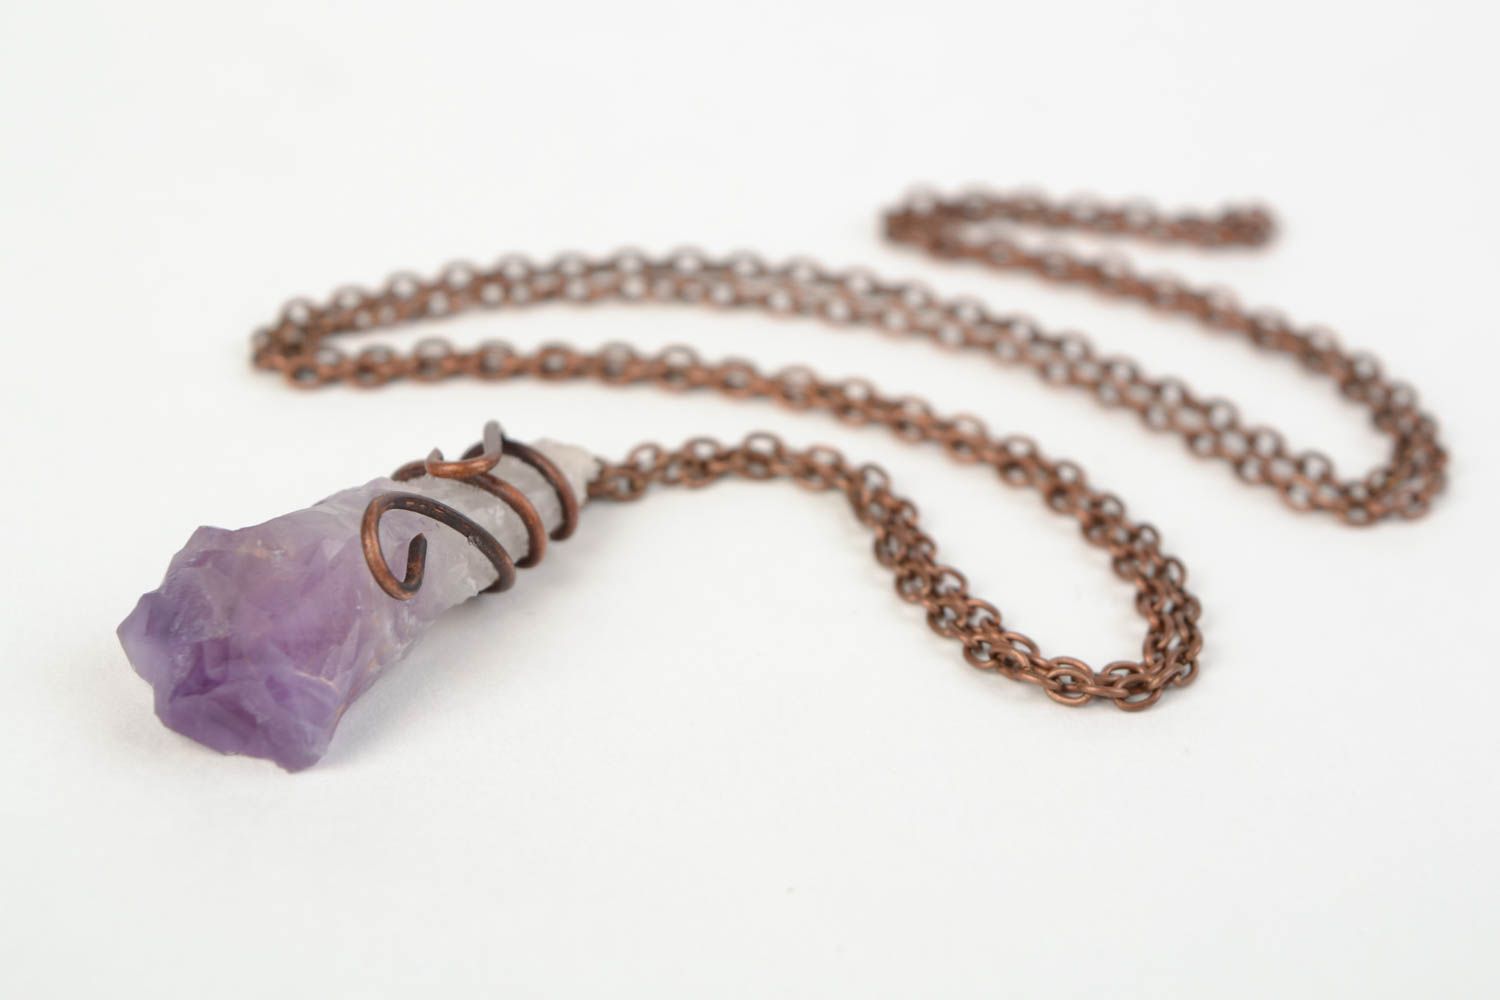 Handmade wire wrap copper neck pendant with natural amethyst stone for women photo 4